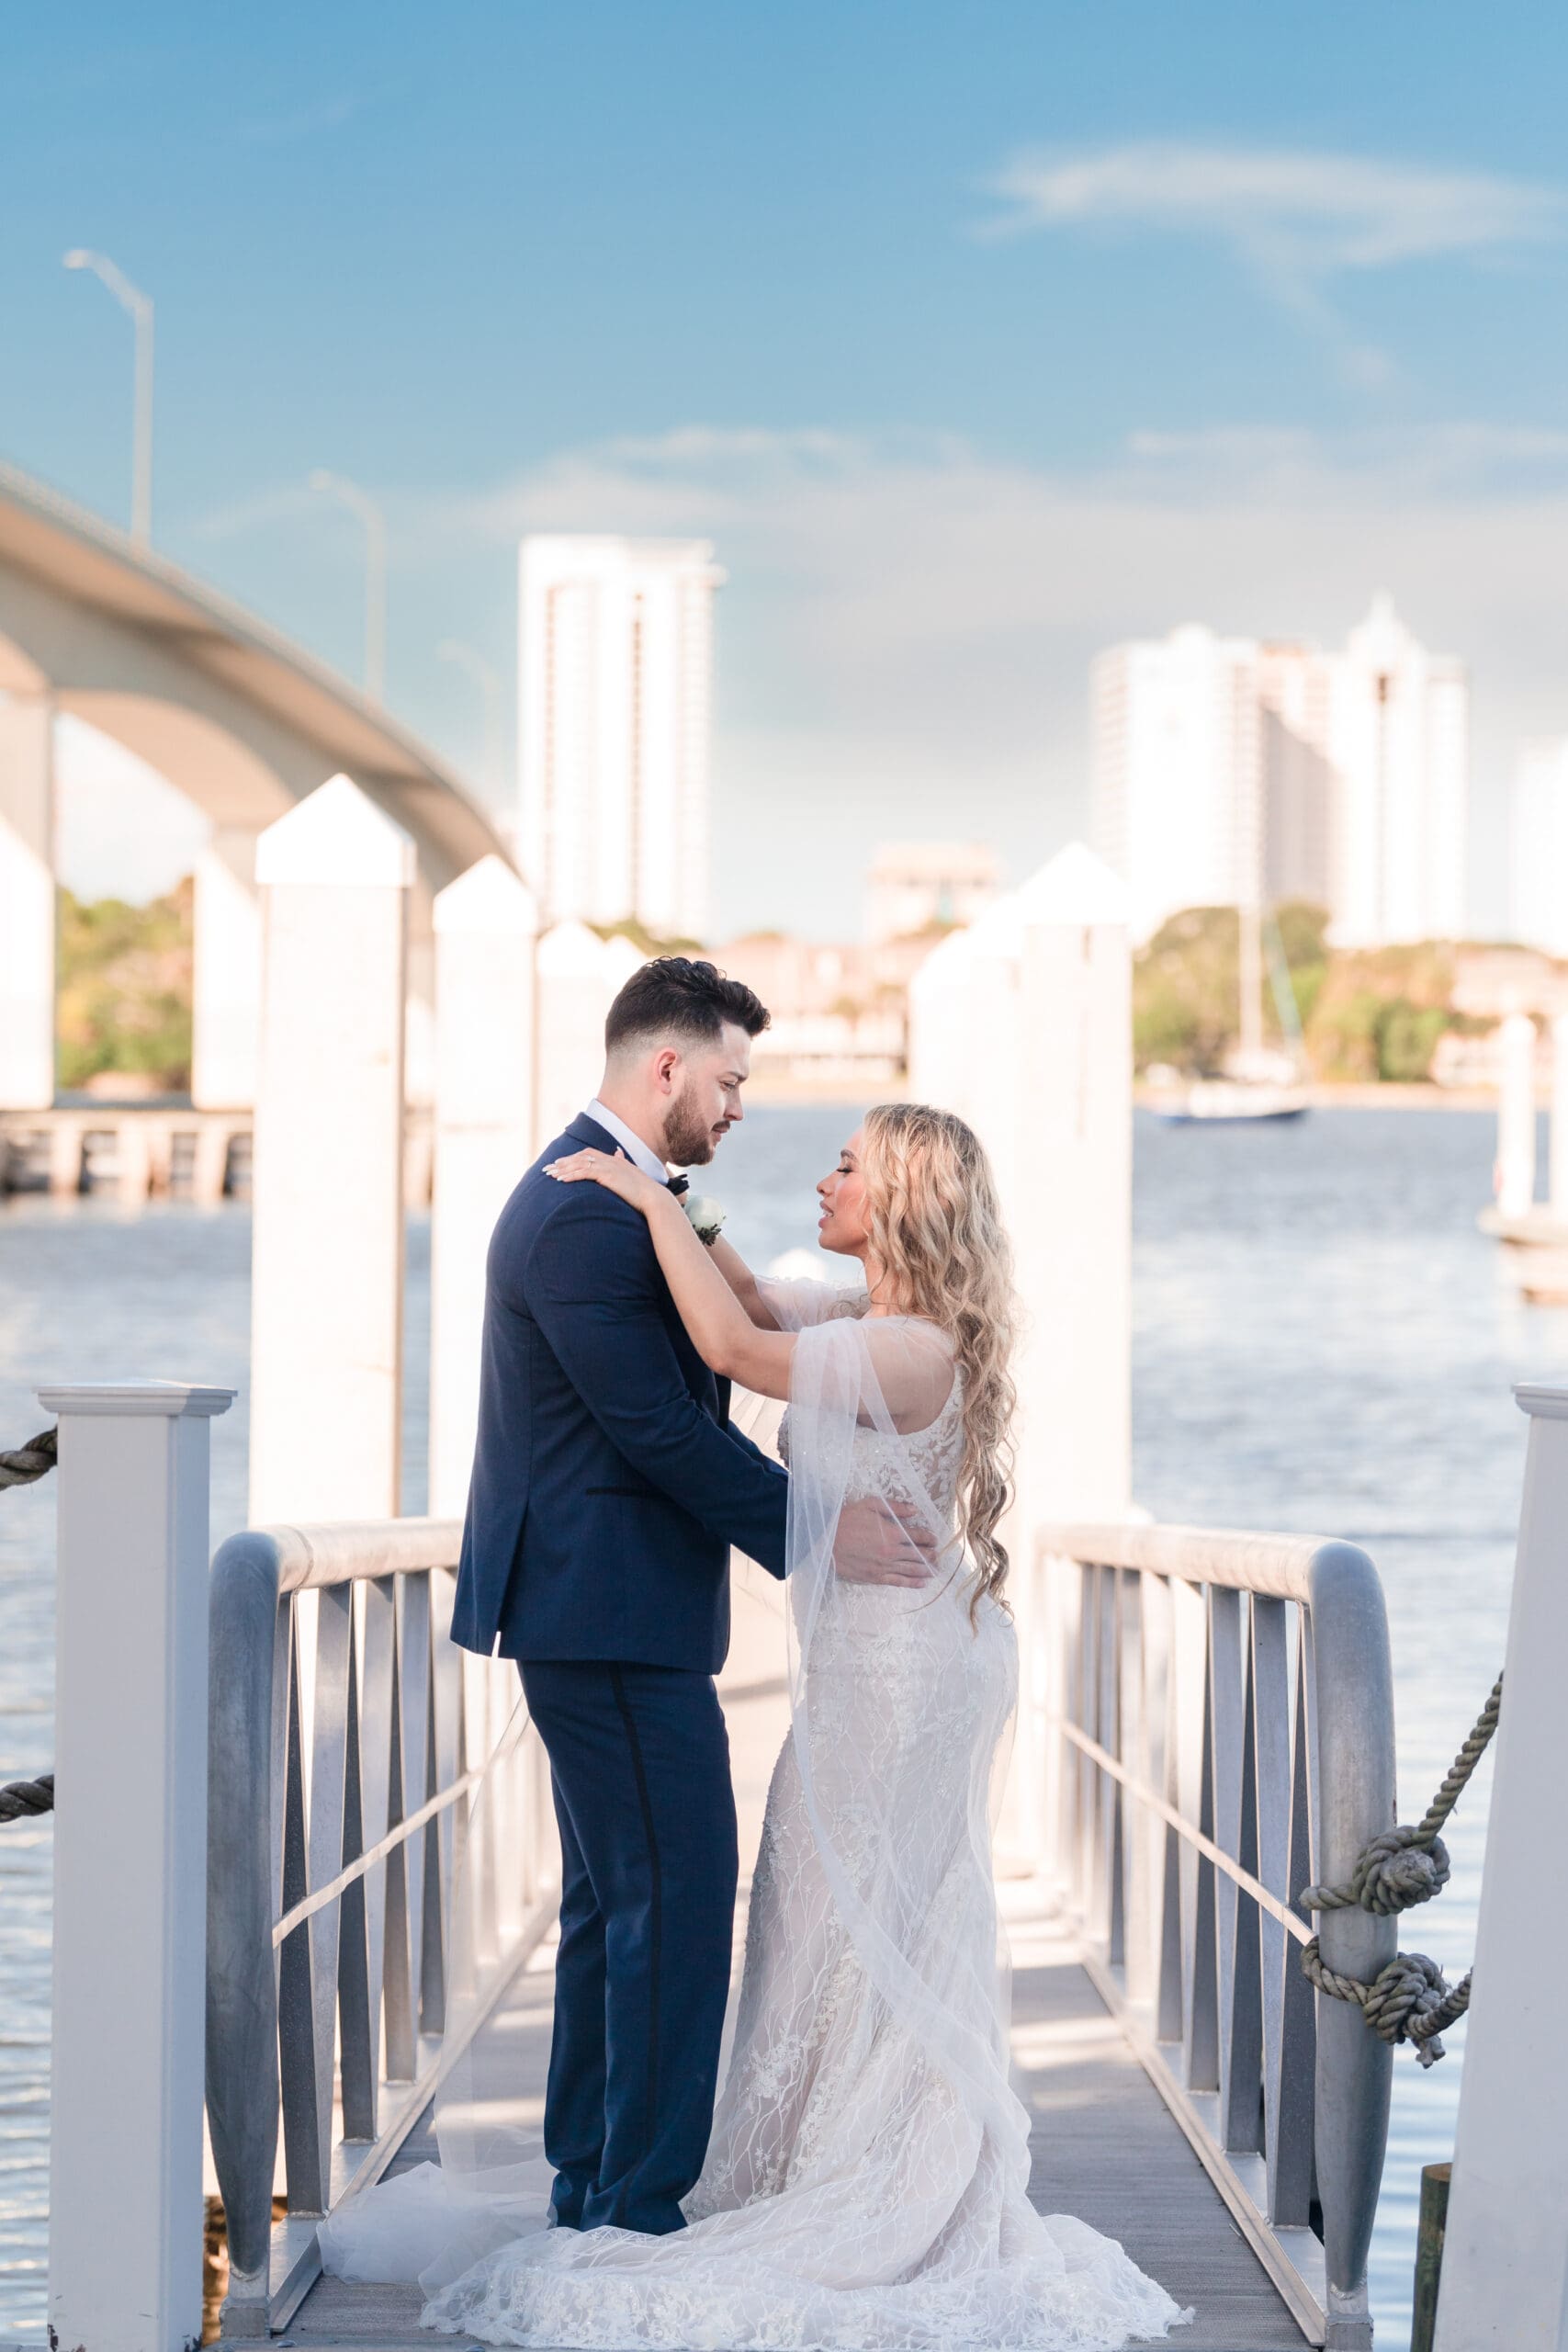 Jenn and Jazer embracing on the tall dock at Sunset Harbor, with ocean in the background.